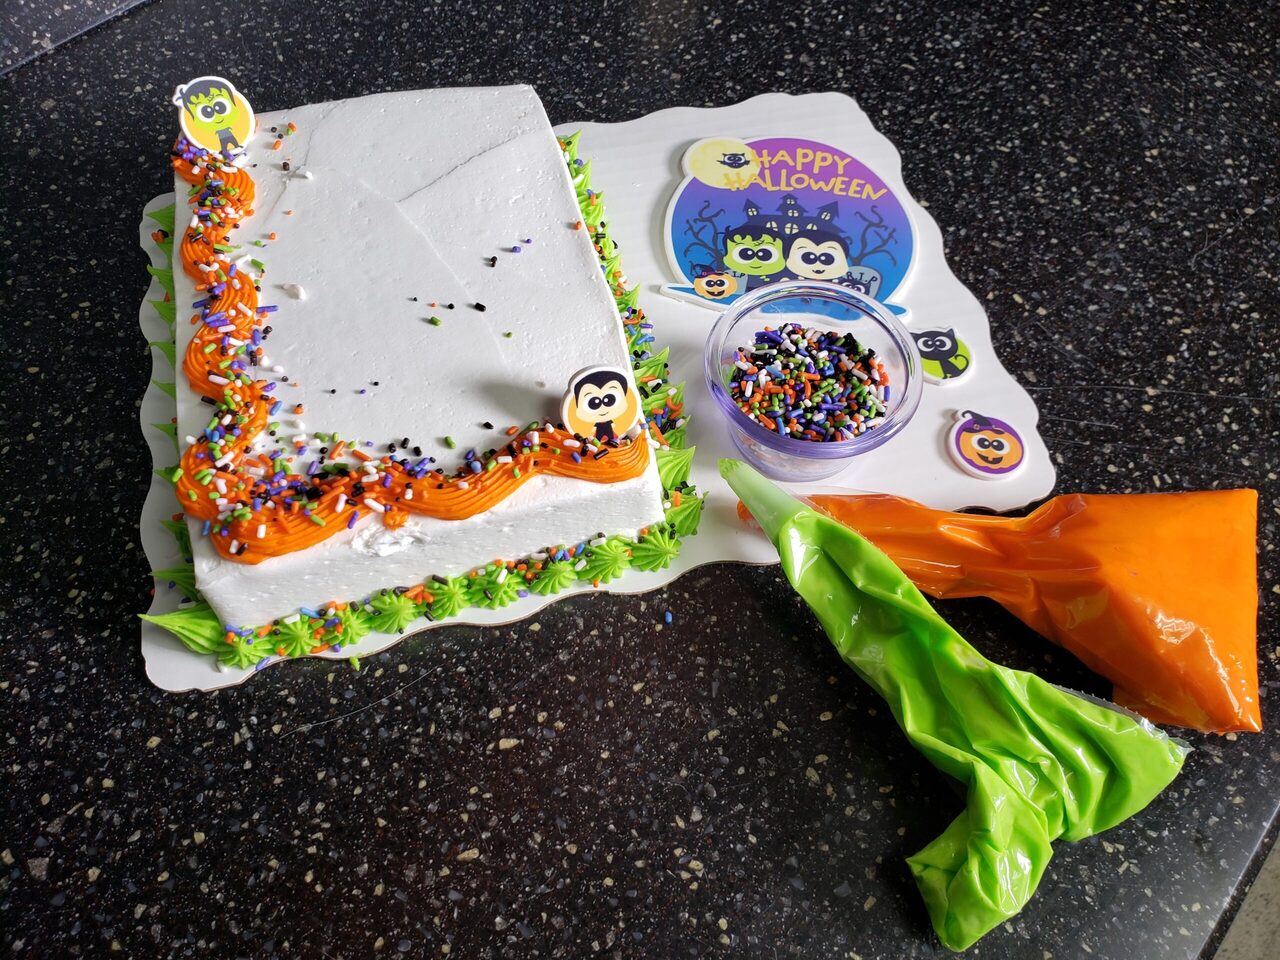 Sam’s Club Is Selling A $10 Ready to Decorate Halloween Cake and My Kids Need It